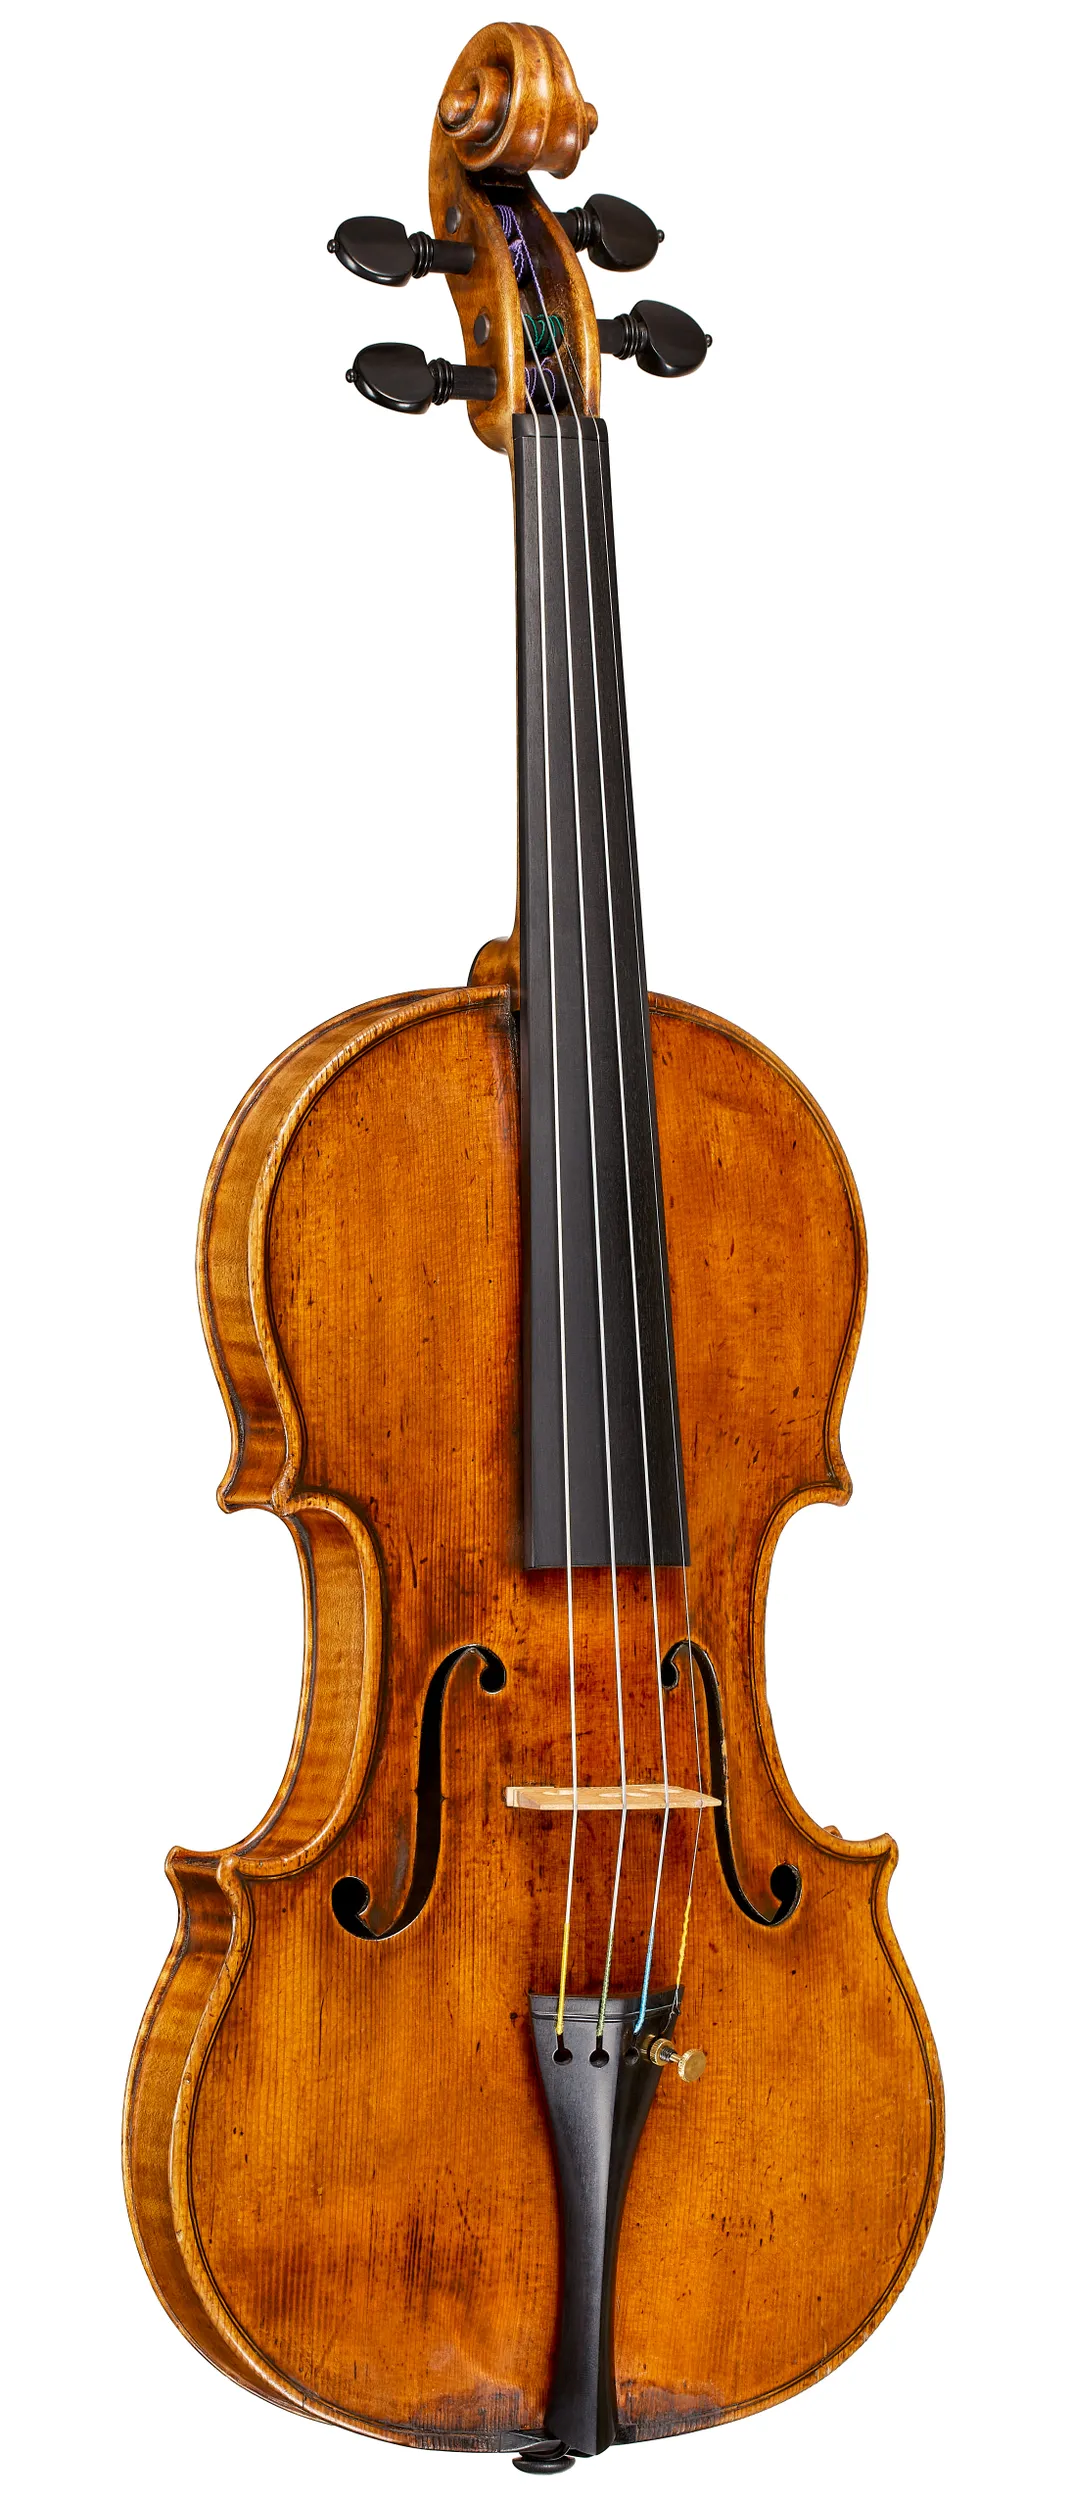 The violin is estimated to sell for around $20 million by Tarisio on June 9.